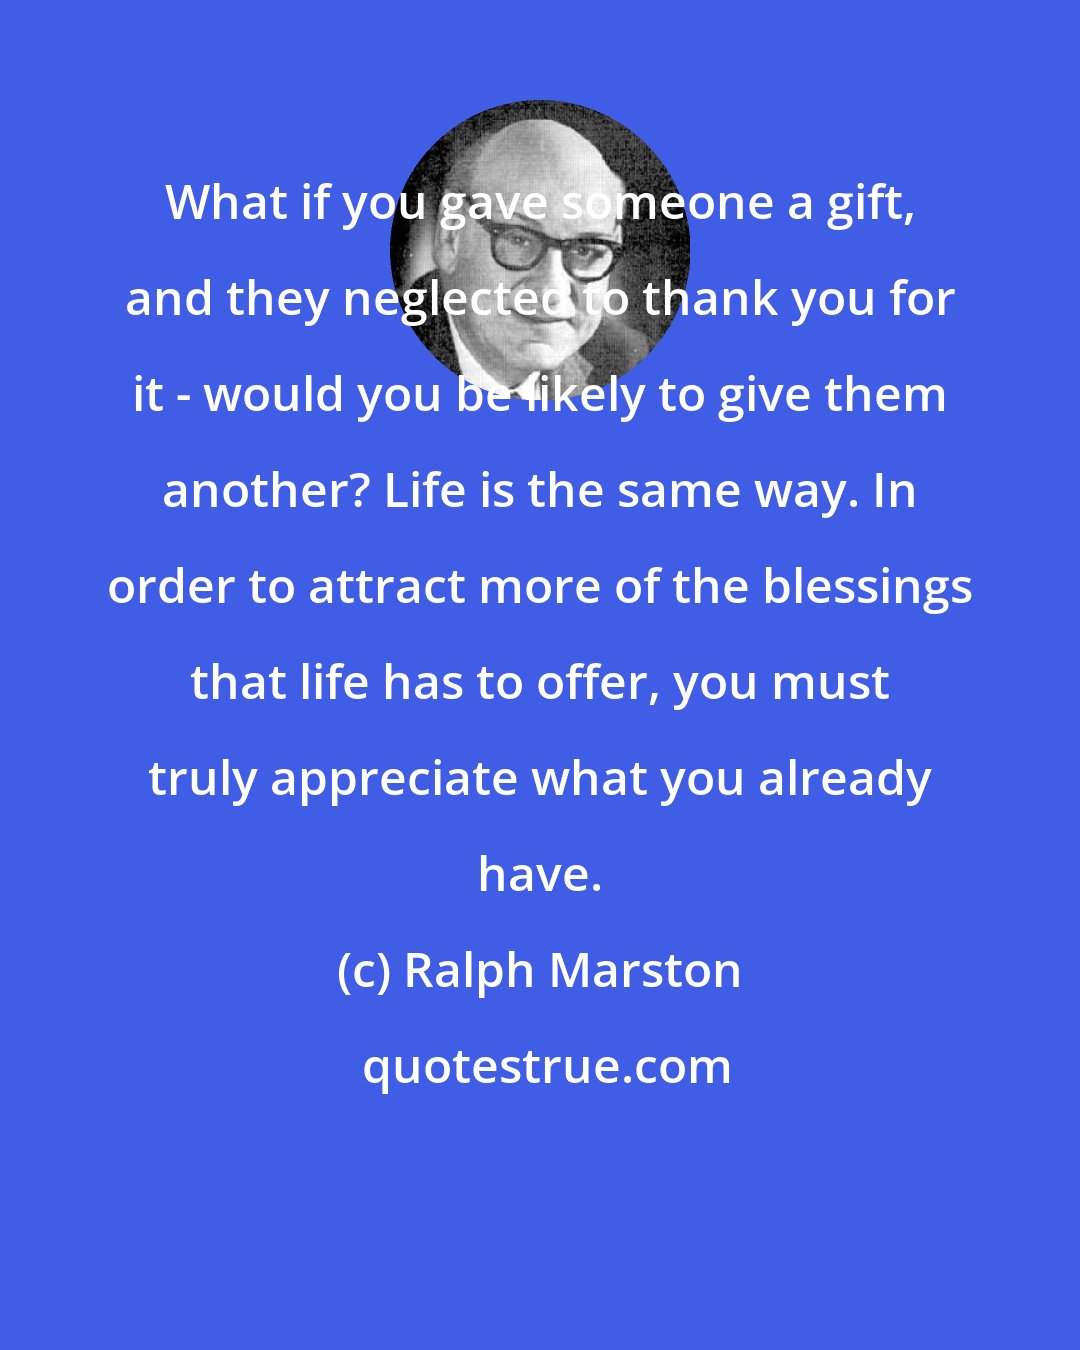 Ralph Marston: What if you gave someone a gift, and they neglected to thank you for it - would you be likely to give them another? Life is the same way. In order to attract more of the blessings that life has to offer, you must truly appreciate what you already have.